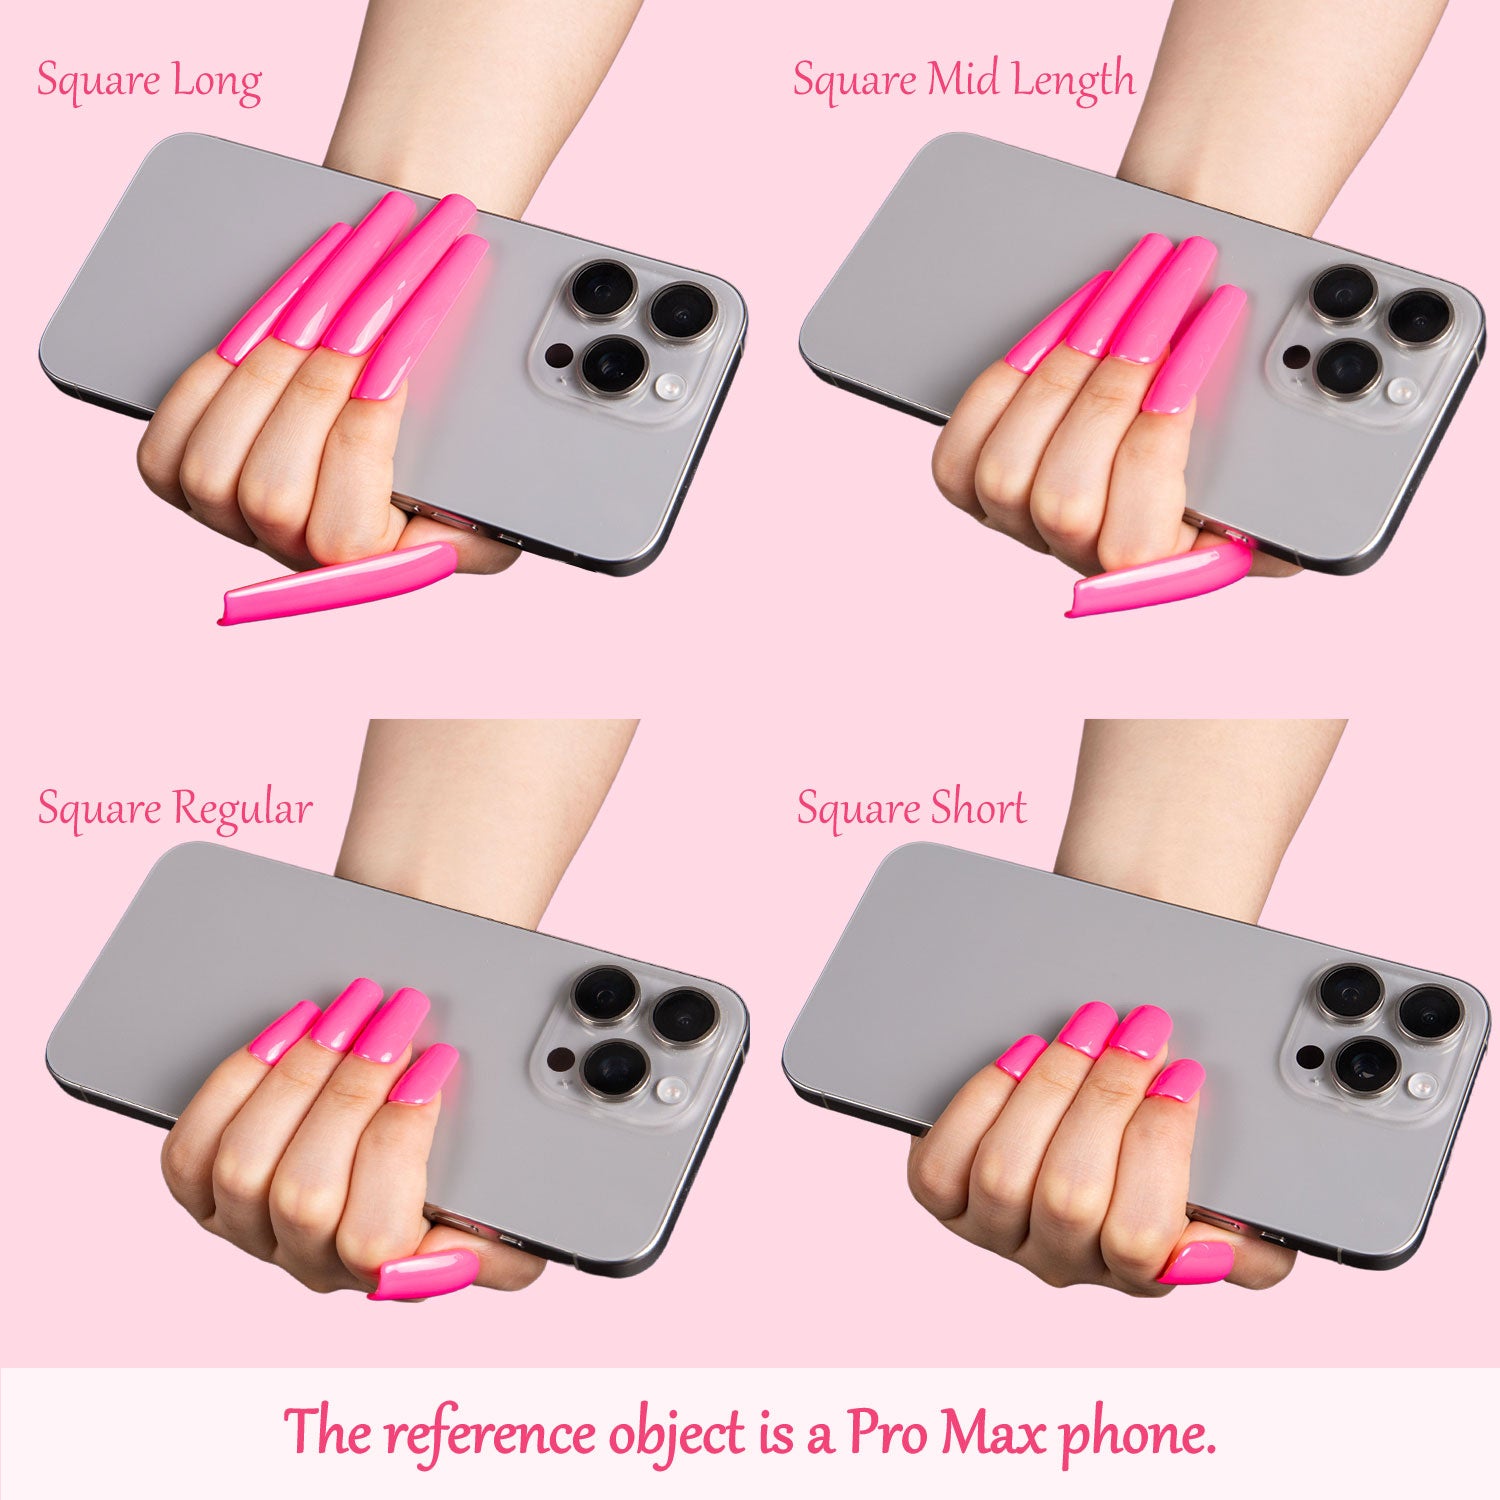 Comparison of four lengths of square-shaped bright pink press-on nails holding a Pro Max phone, showcasing lengths Square Long, Square Mid Length, Square Regular, and Square Short